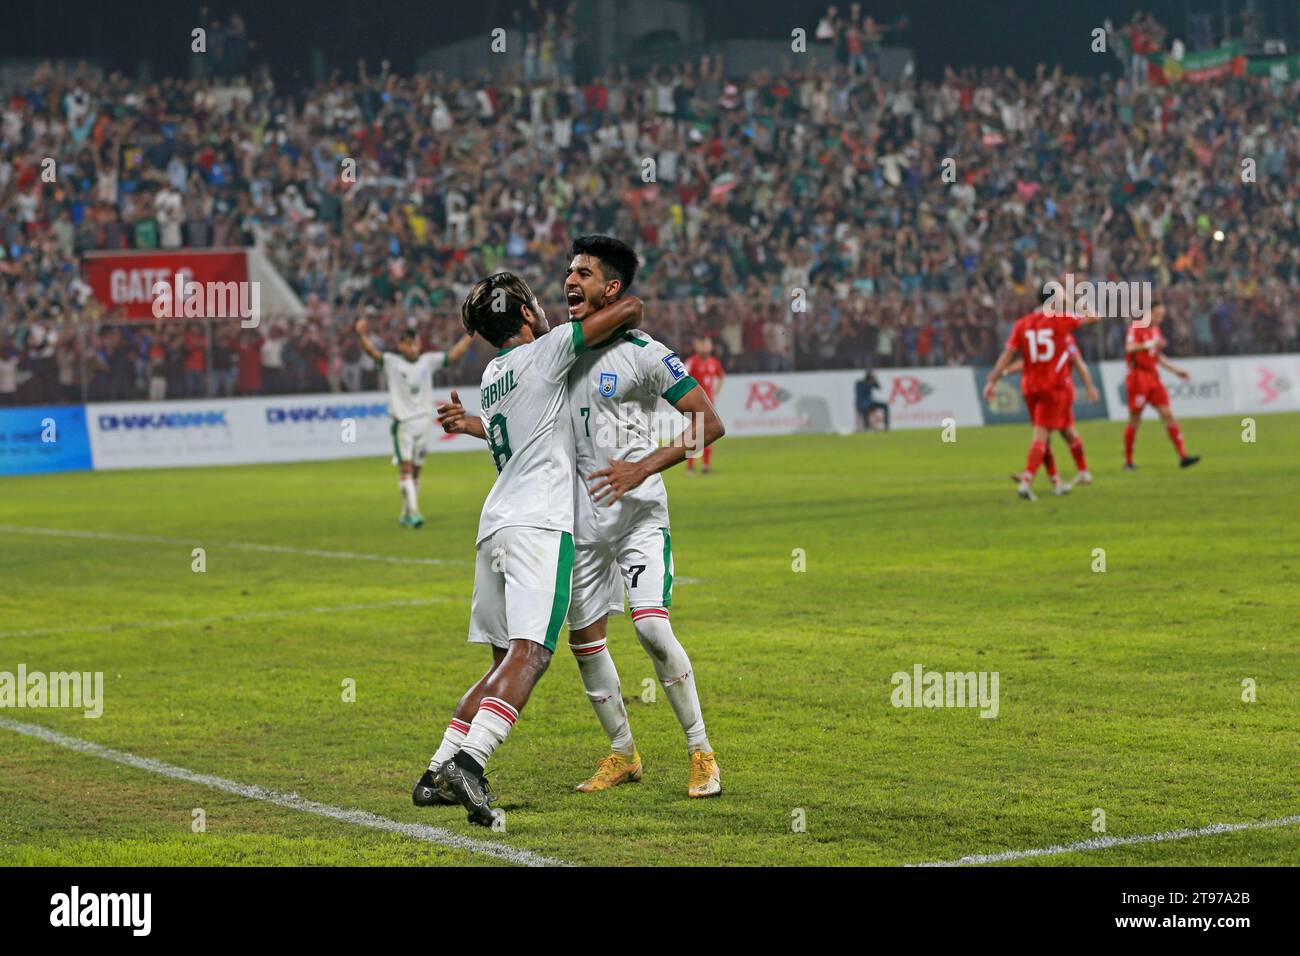 Sheikh Morsalin celebrates as his eye-catching goal helped Bangladesh earn a come-from-behind 1-1 draw against visiting Lebanon in a World Cup Qualifi Stock Photo